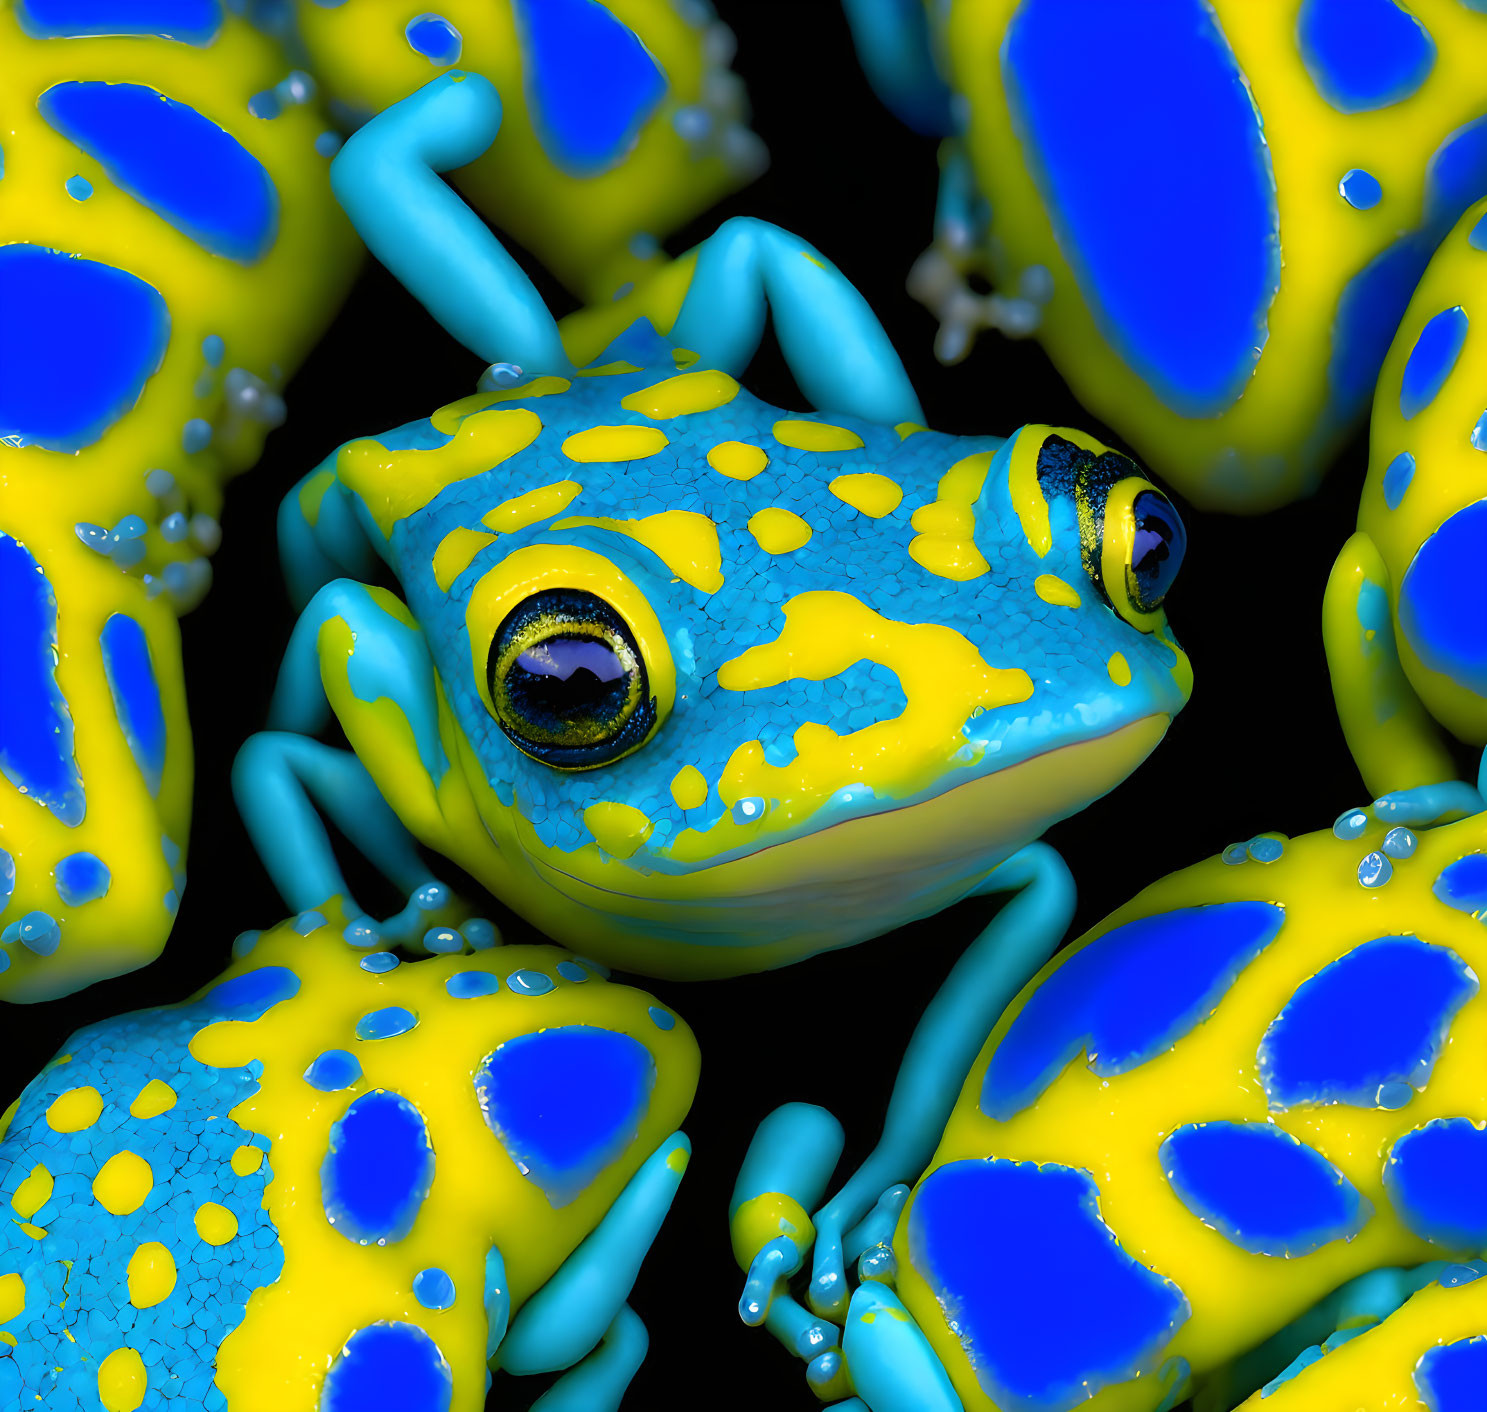 Colorful Blue and Yellow Patterned Frogs on Dark Background